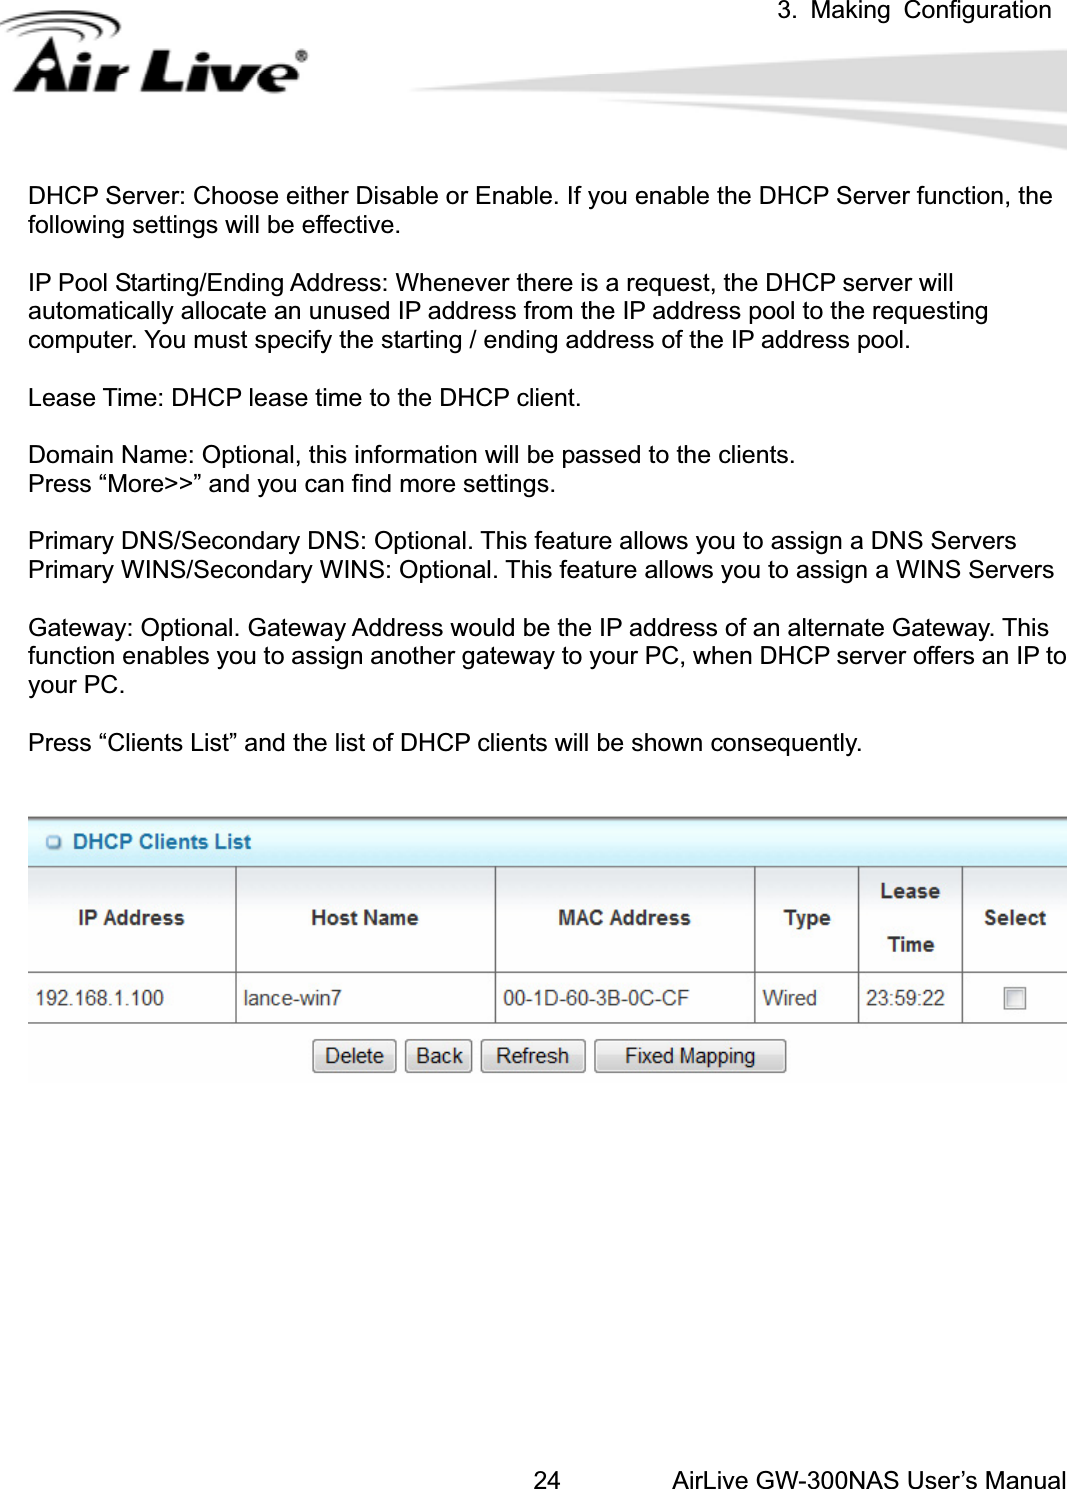 3. Making ConfigurationAirLive GW-300NAS User’s Manual24DHCP Server: Choose either Disable or Enable. If you enable the DHCP Server function, the following settings will be effective. IP Pool Starting/Ending Address: Whenever there is a request, the DHCP server will automatically allocate an unused IP address from the IP address pool to the requesting computer. You must specify the starting / ending address of the IP address pool. Lease Time: DHCP lease time to the DHCP client. Domain Name: Optional, this information will be passed to the clients. Press “More&gt;&gt;” and you can find more settings. Primary DNS/Secondary DNS: Optional. This feature allows you to assign a DNS Servers Primary WINS/Secondary WINS: Optional. This feature allows you to assign a WINS Servers Gateway: Optional. Gateway Address would be the IP address of an alternate Gateway. This function enables you to assign another gateway to your PC, when DHCP server offers an IP to your PC.   Press “Clients List” and the list of DHCP clients will be shown consequently. 